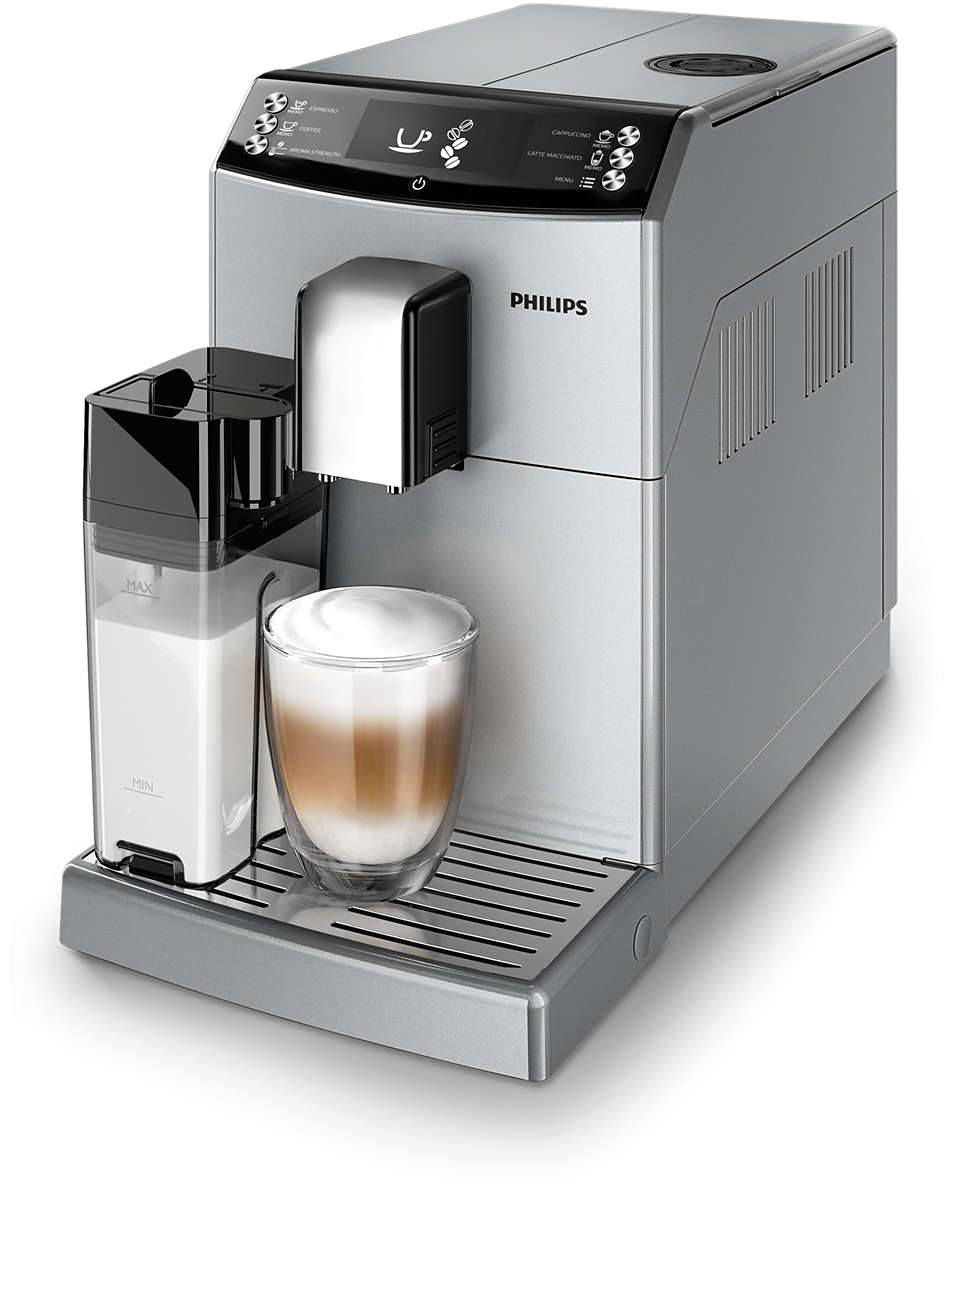 Made a contract Pay tribute motion 3100 series Fully automatic espresso machines EP3551/10 | Philips